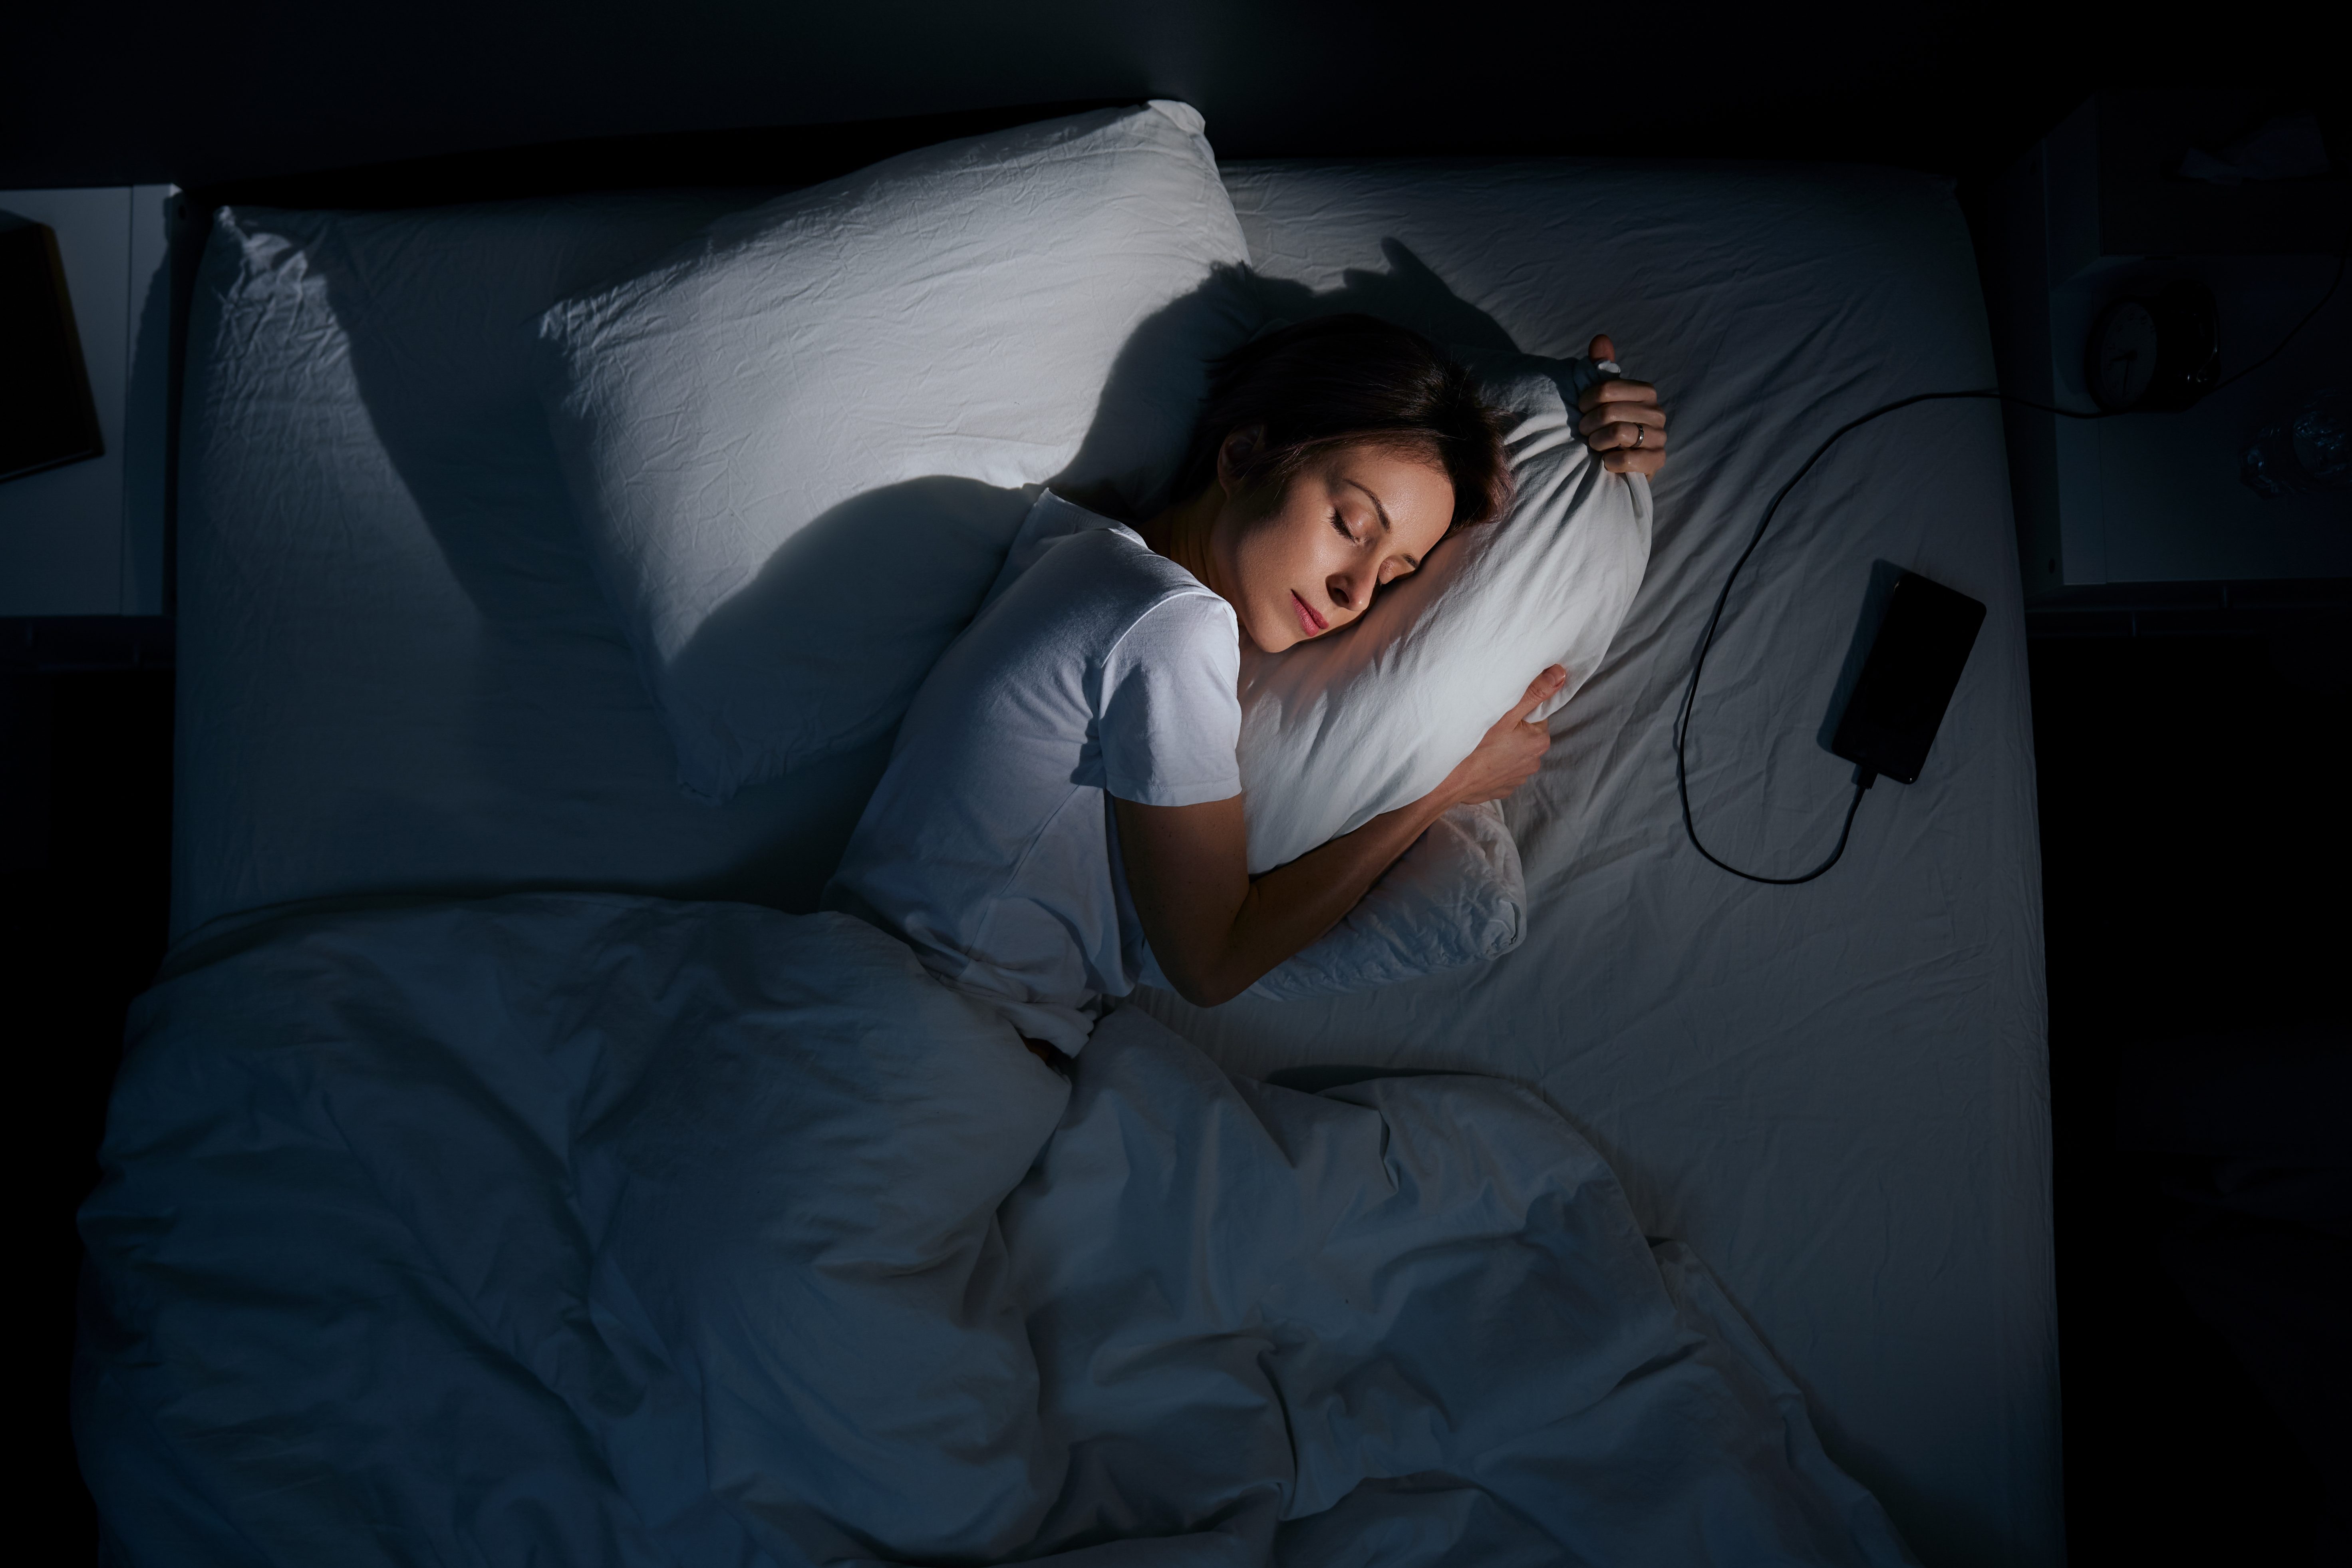 A woman practices self-care by getting a wonderful night’s sleep.